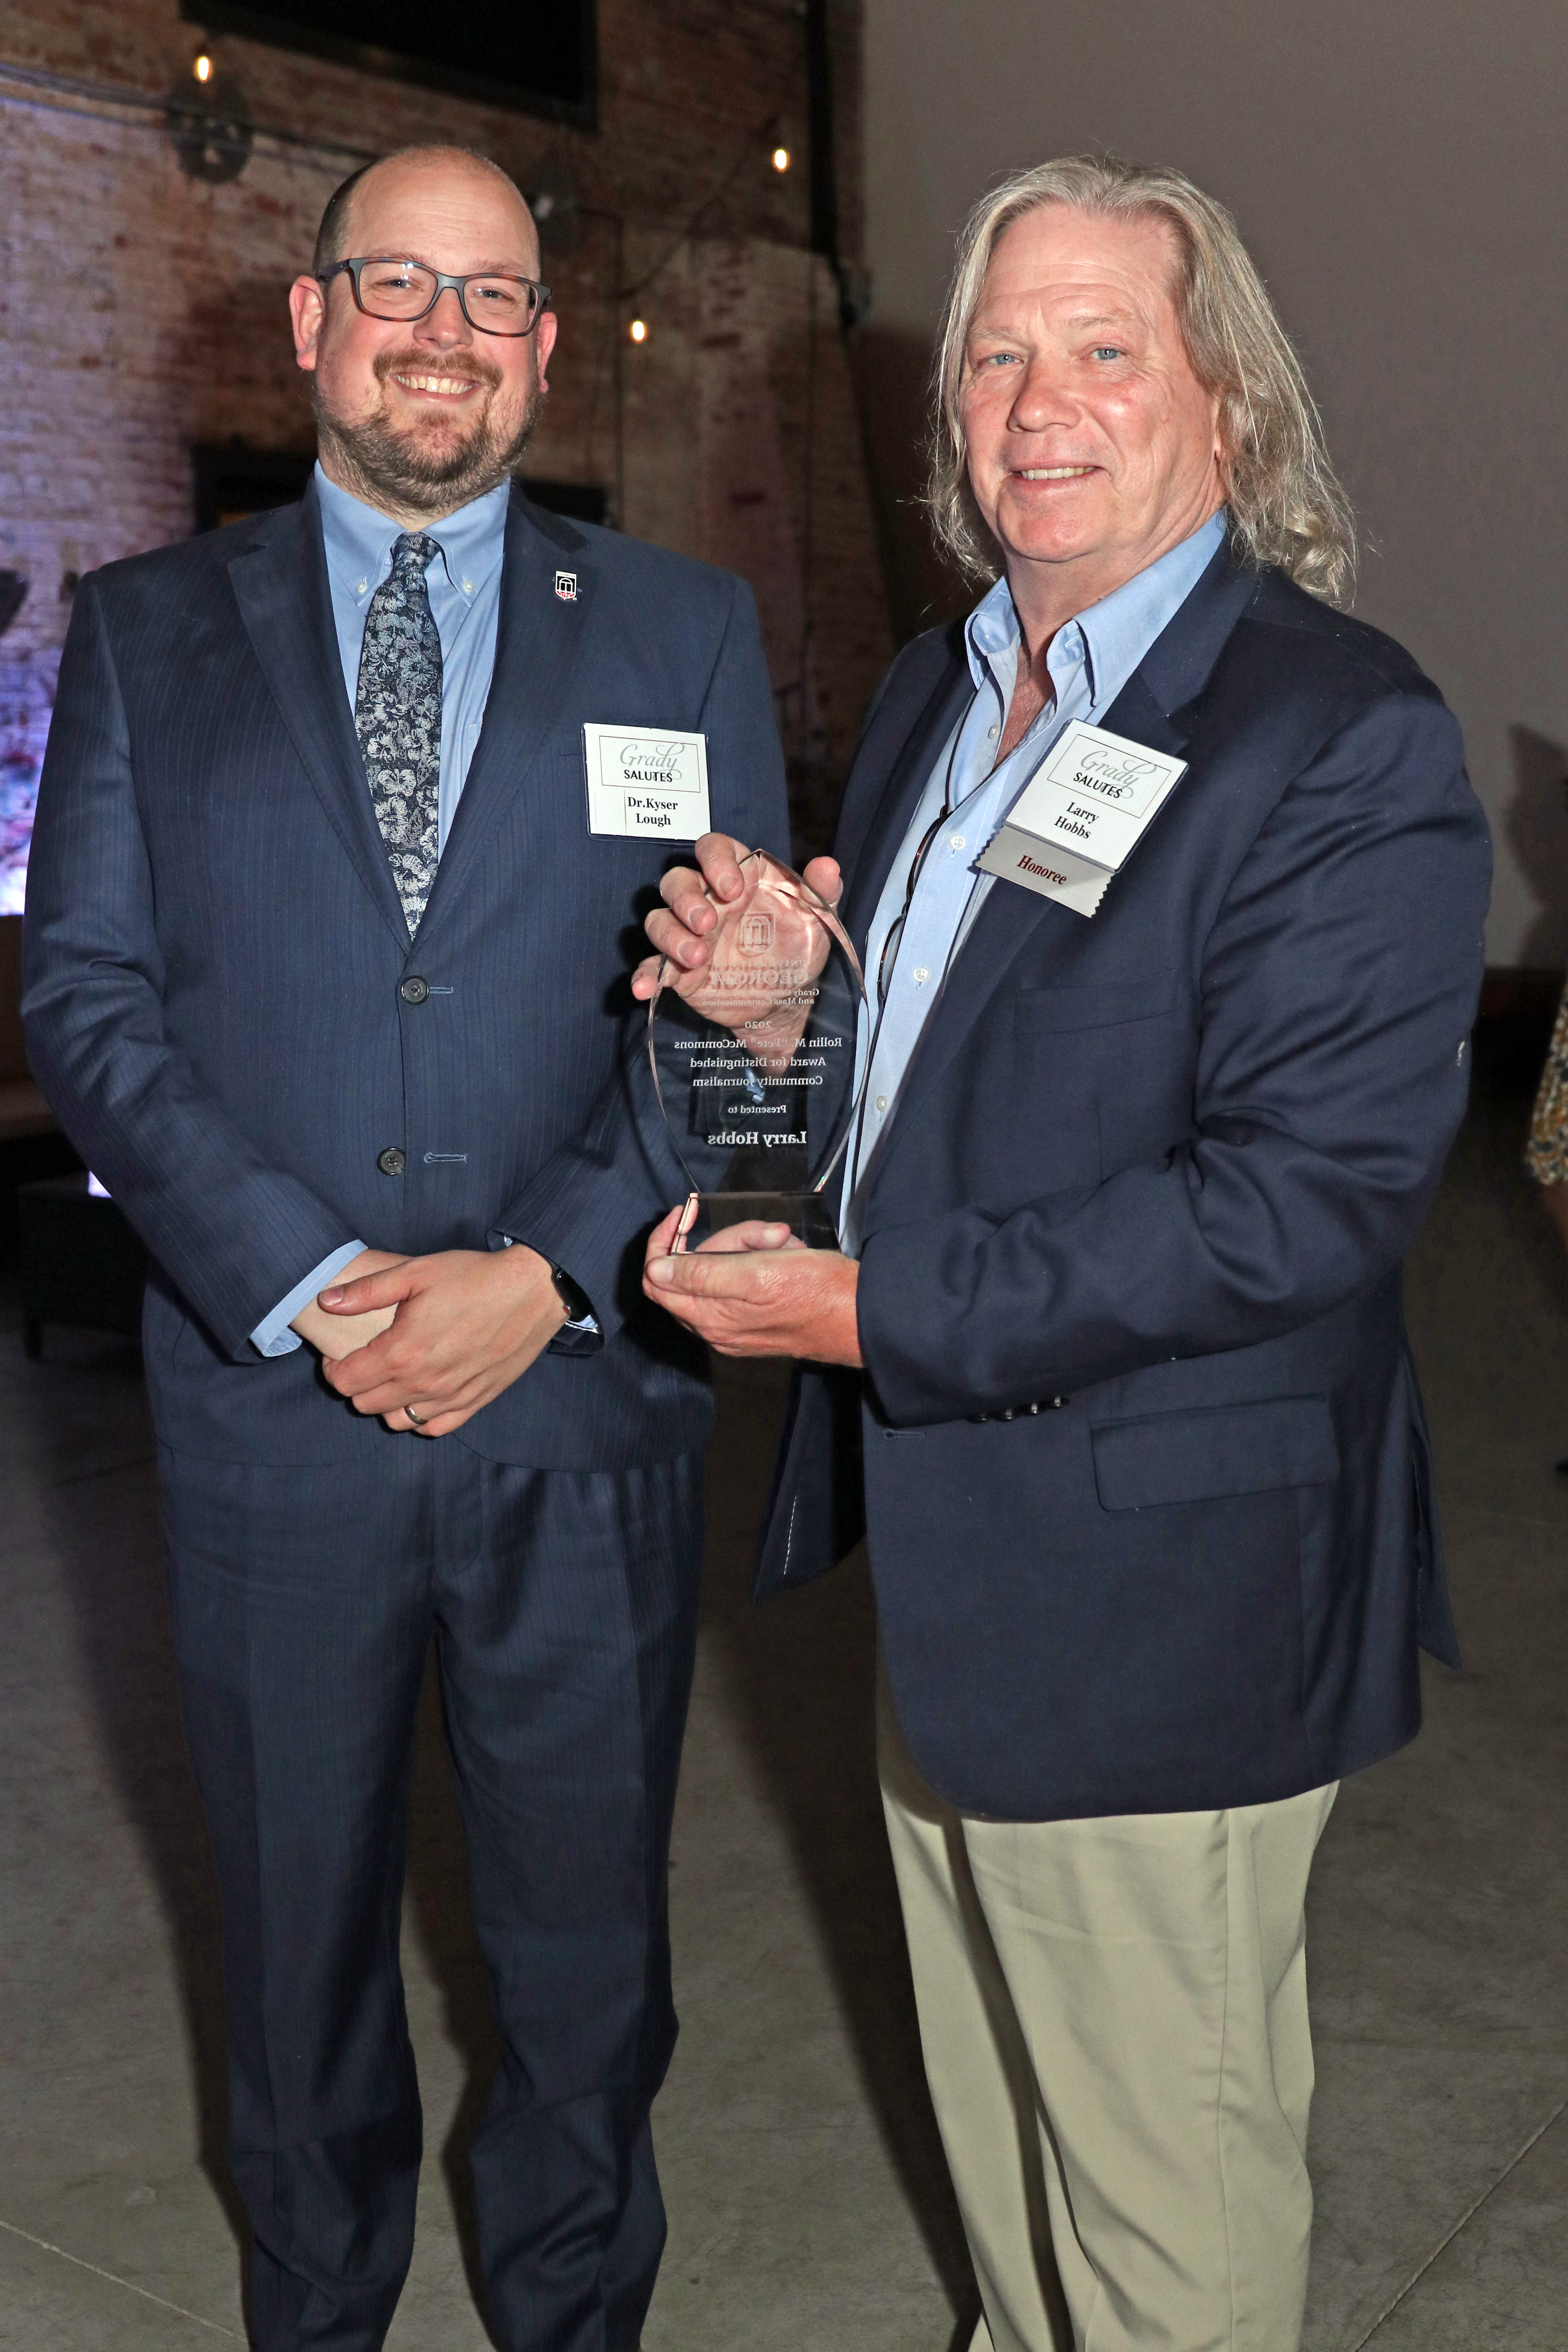 Larry Hobbs (right) stands nest to Kyser Lough (left), the chair of the McCommons Award Committee and an assistant professor in Grady’s Department of Journalism. 